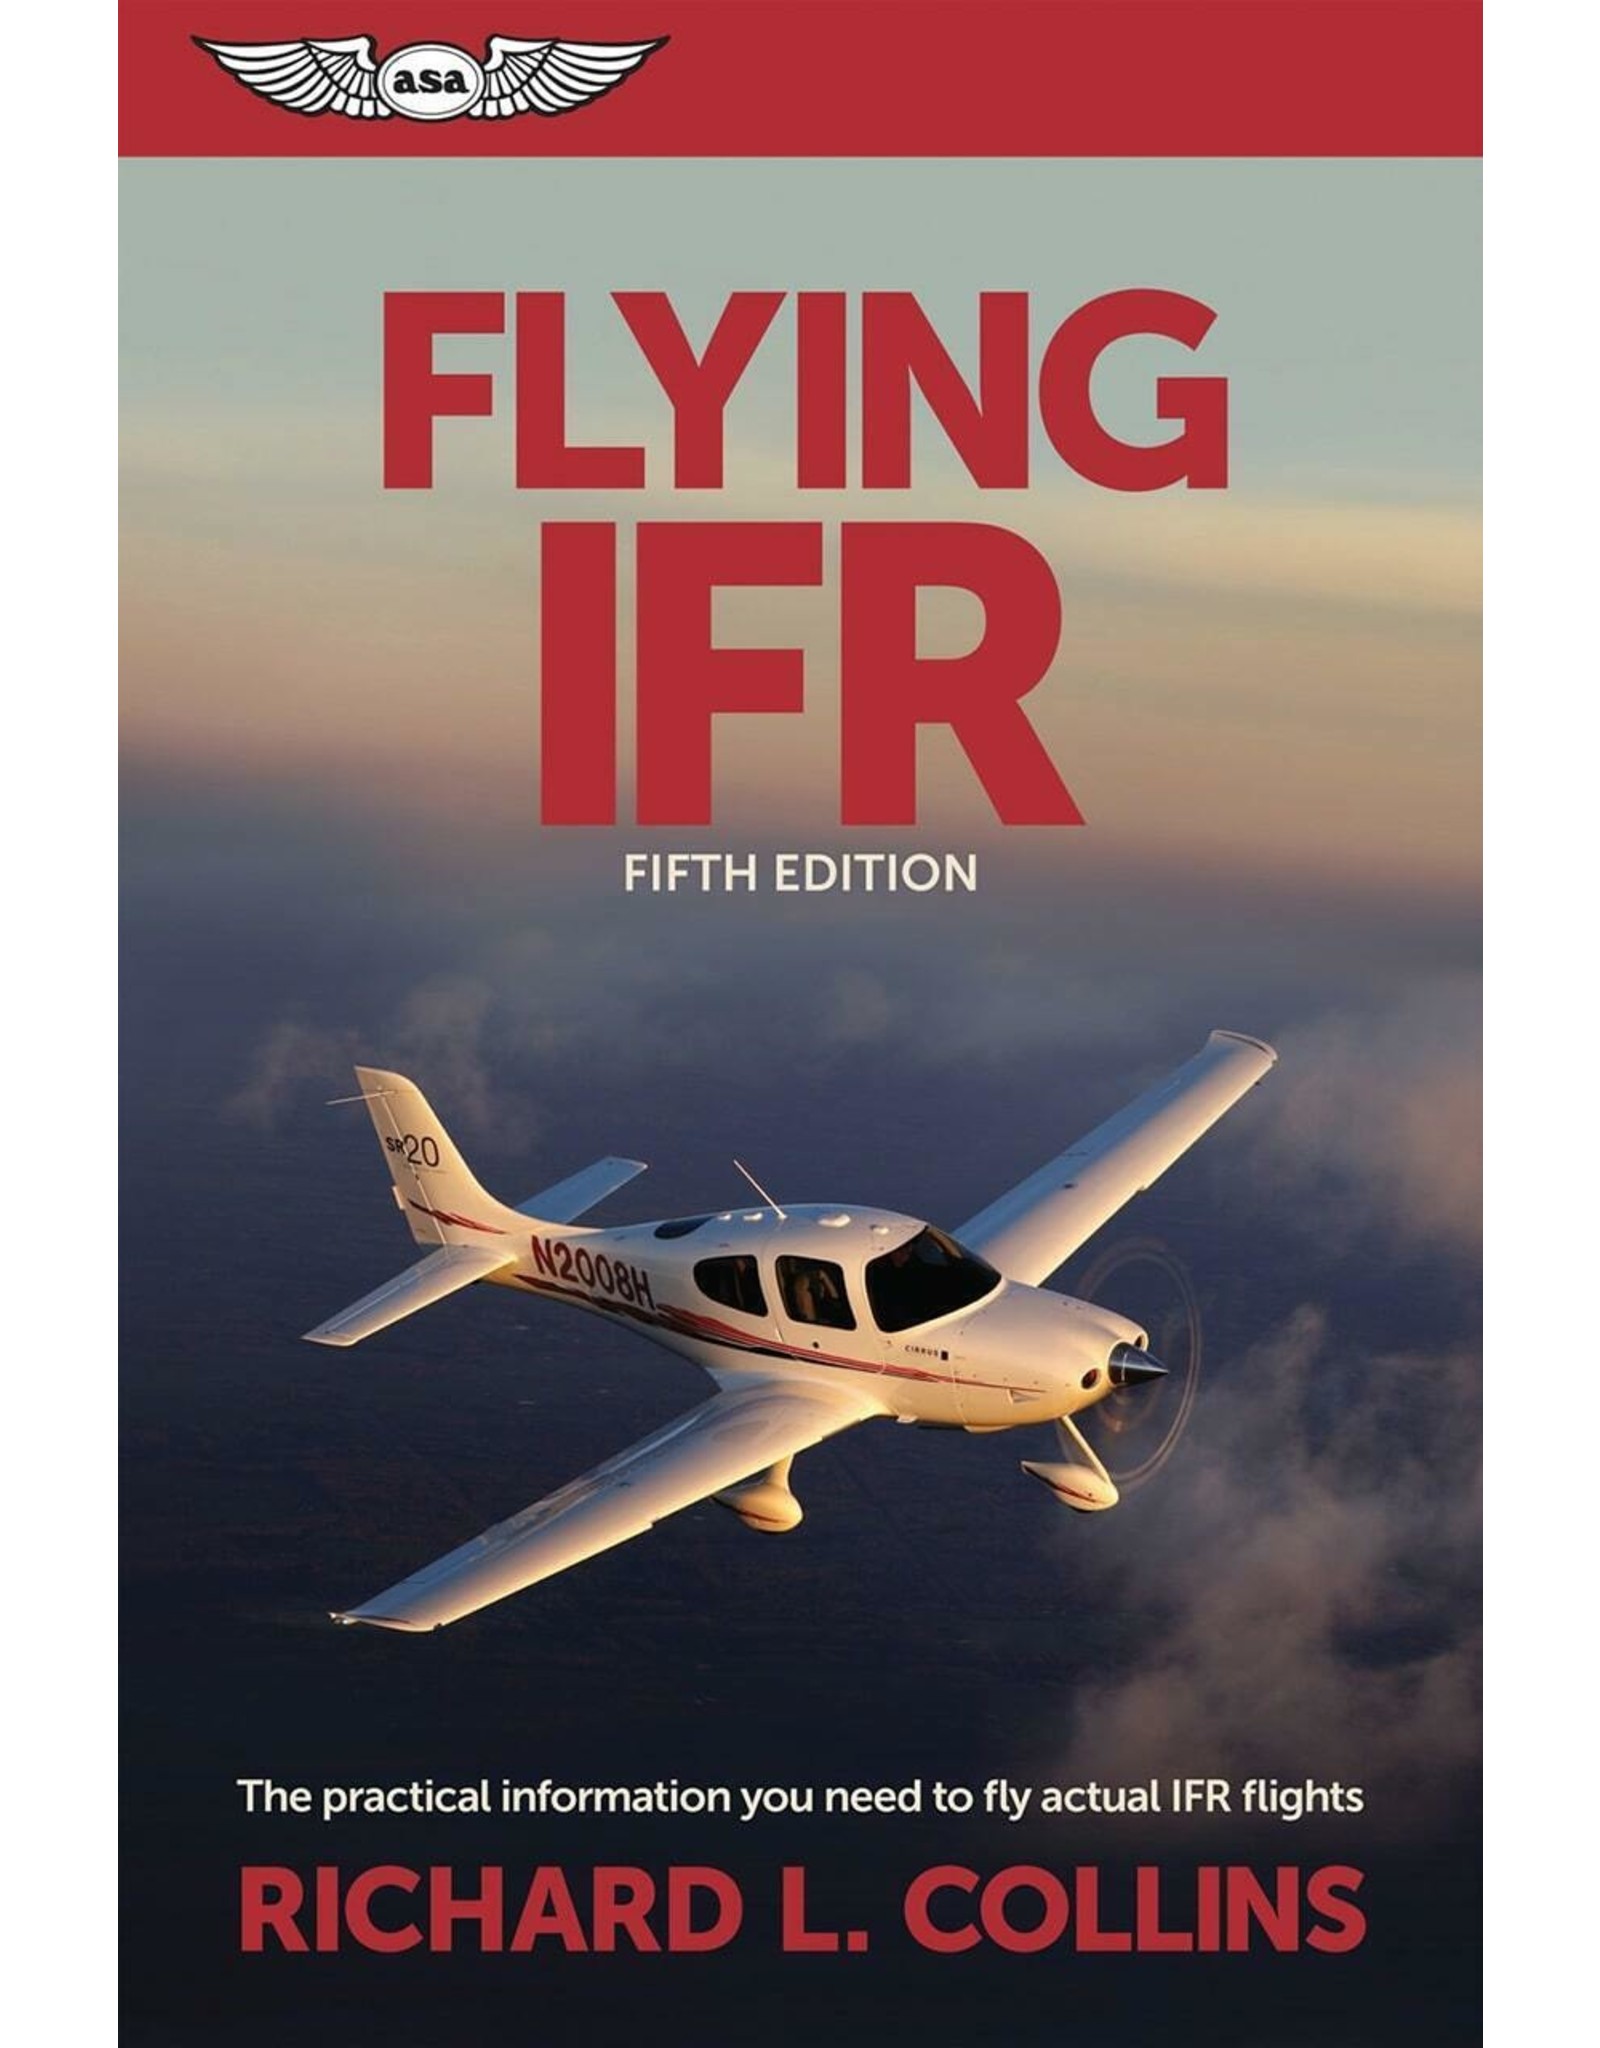 Flying IFR -- 5th ed.